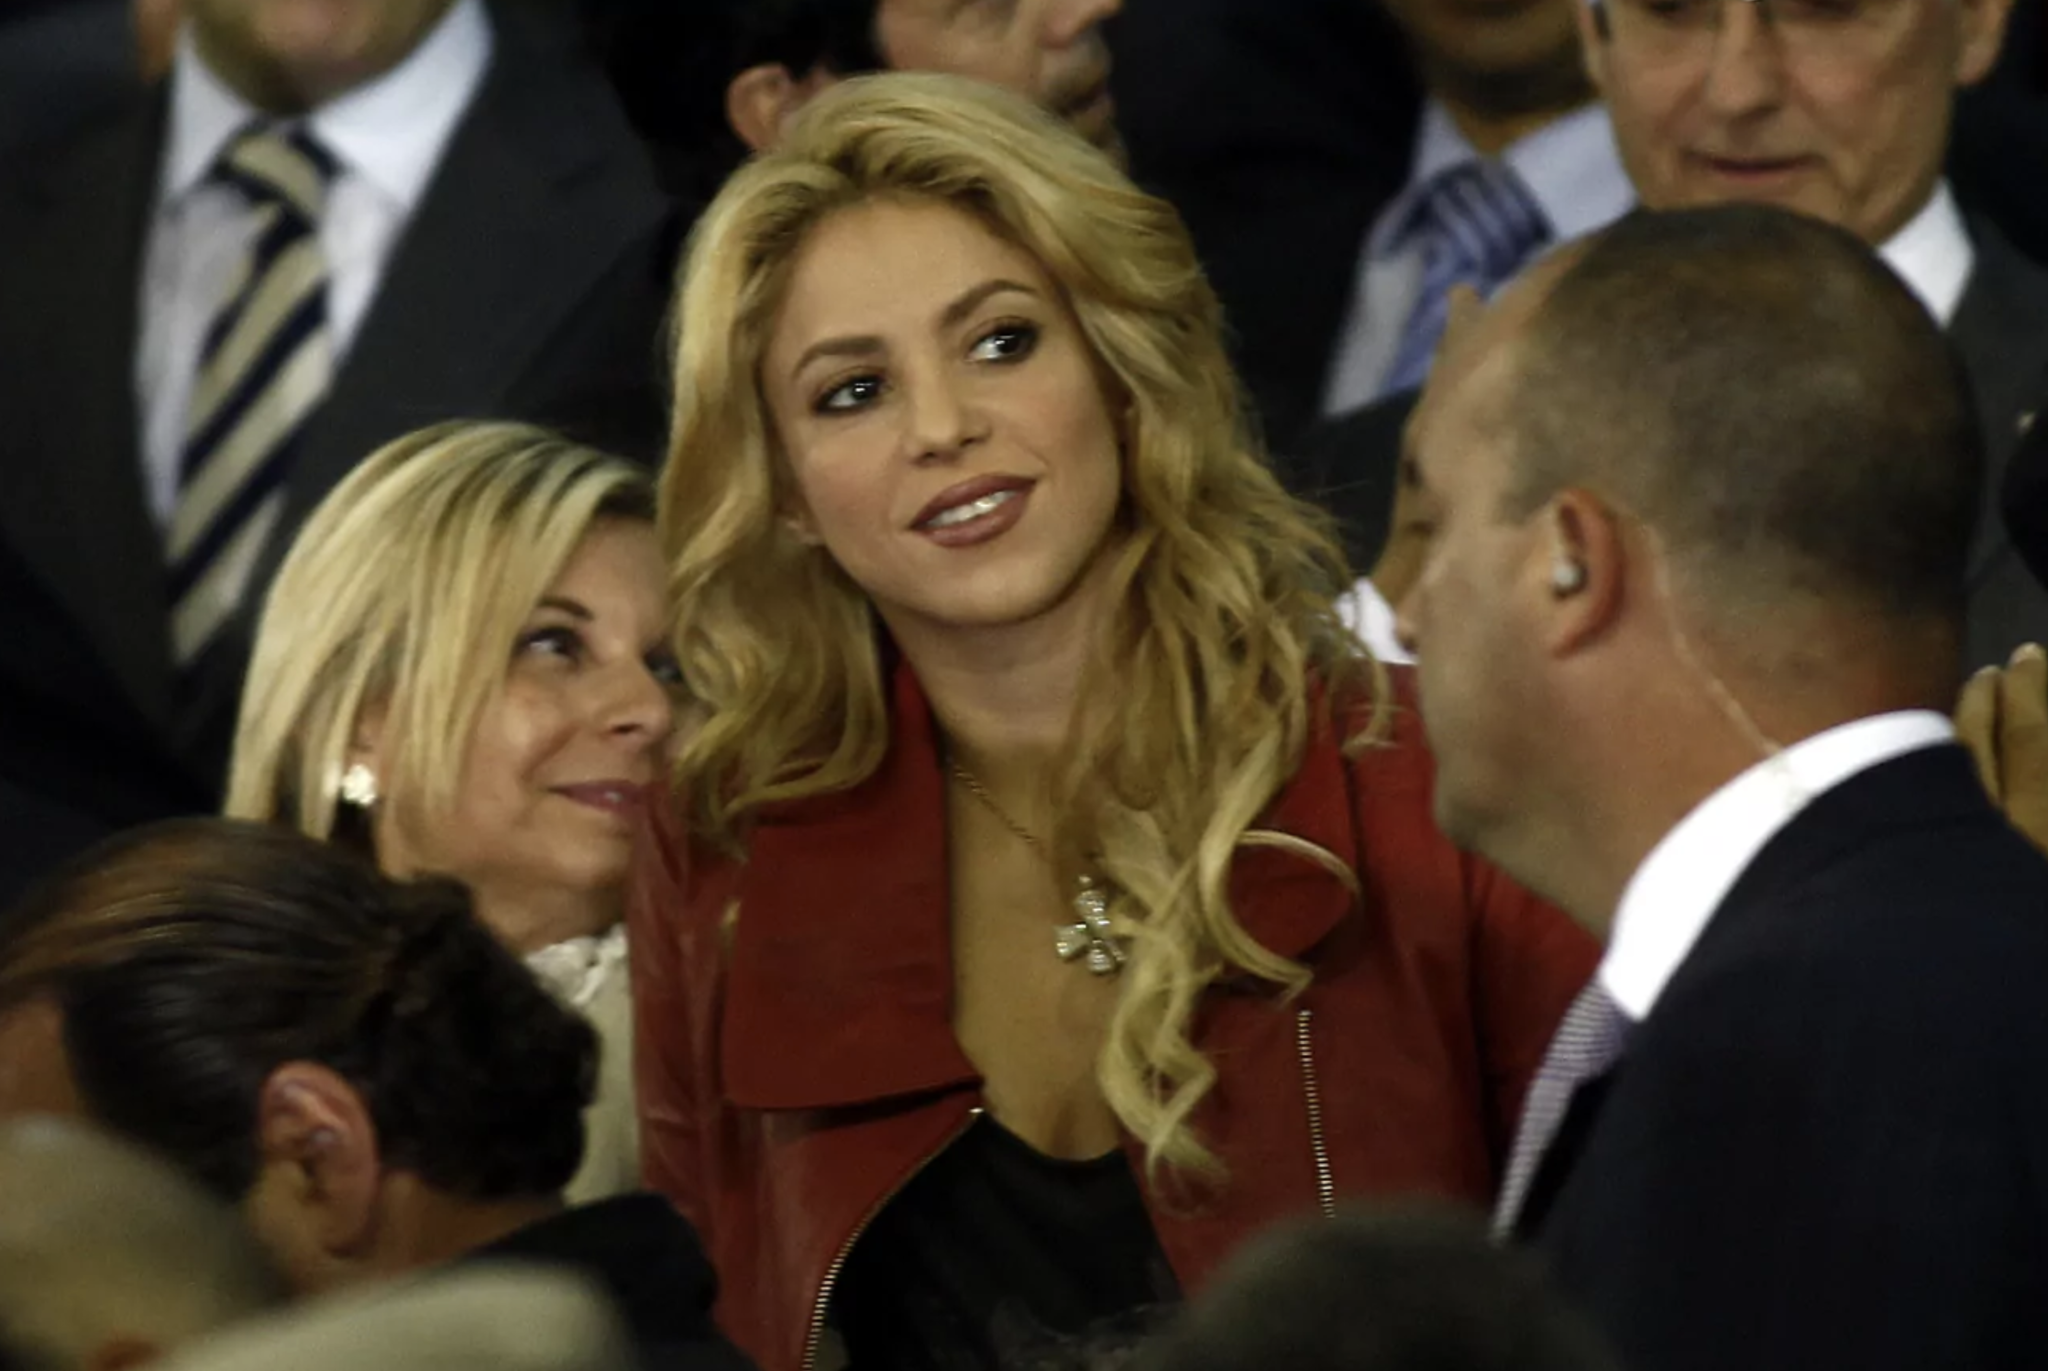 Shakira and her strange move in Barcelona that surprised Pique and his entourage